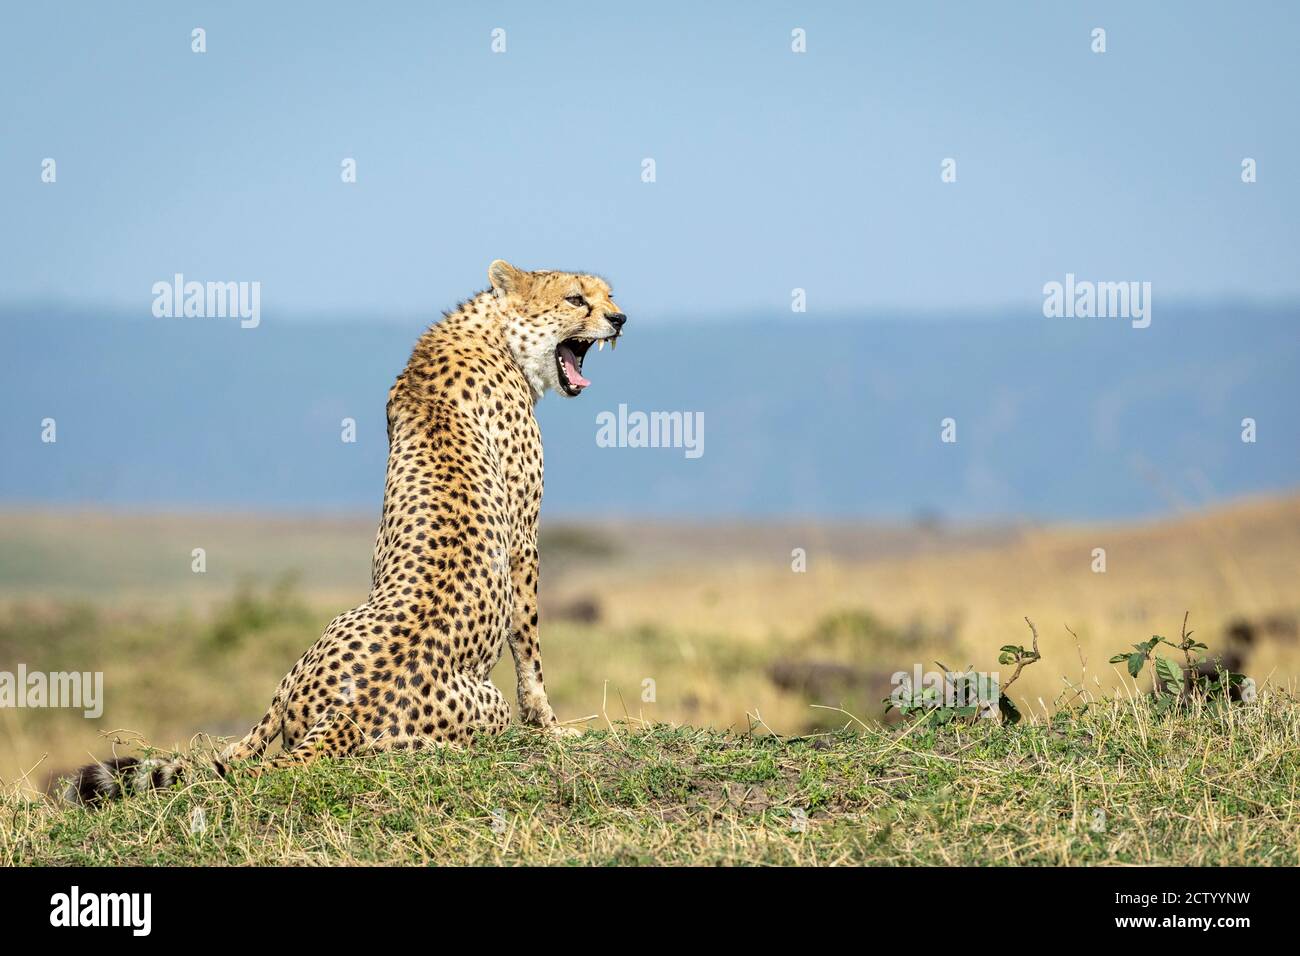 Horizontal portrait of a cheetah sitting on grass and yawning with blue sky in the background in Masai Mara in Kenya Stock Photo